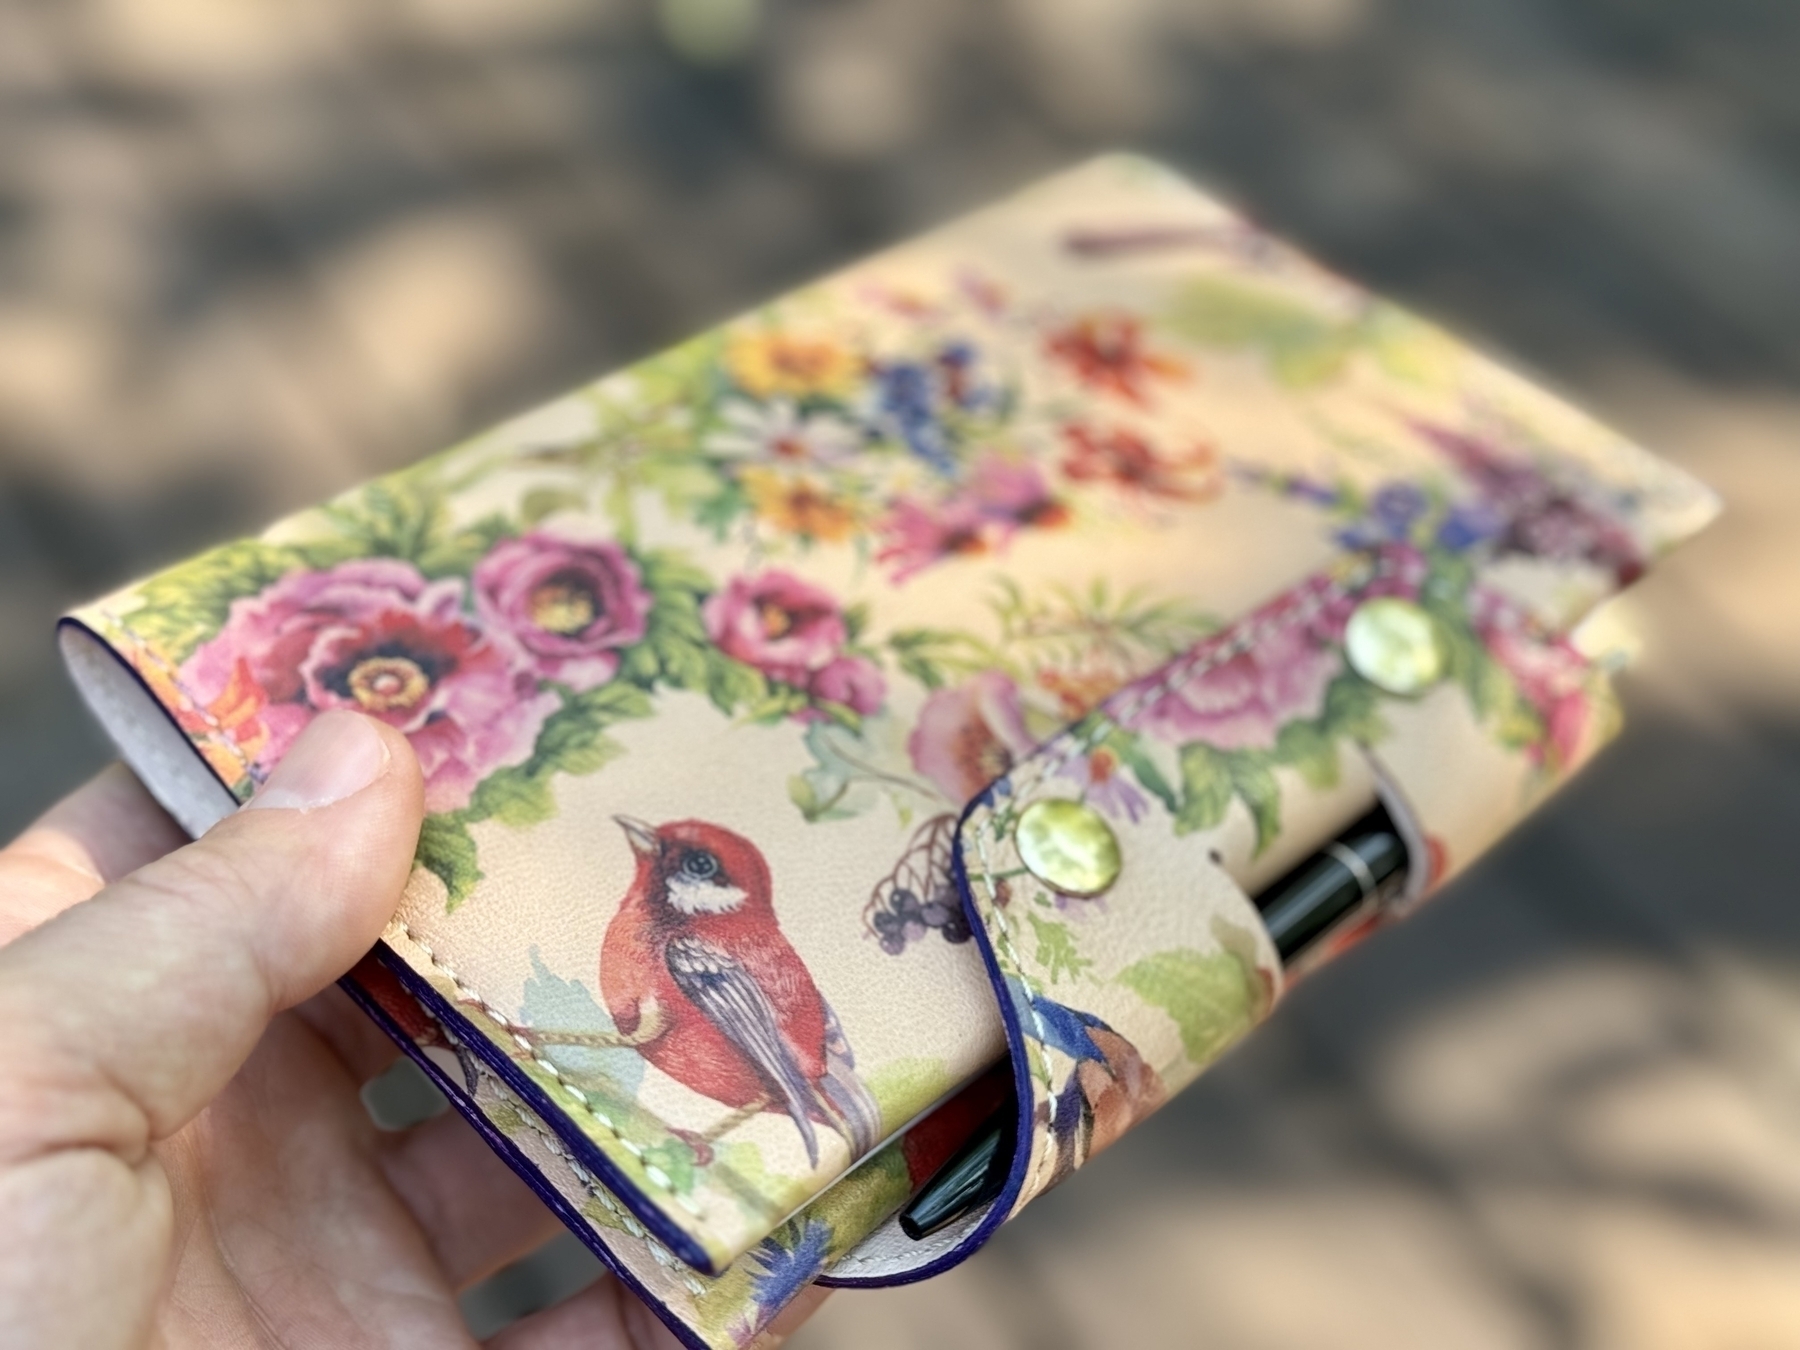 A hand is holding a floral-patterned wallet with button closures and a red bird design.